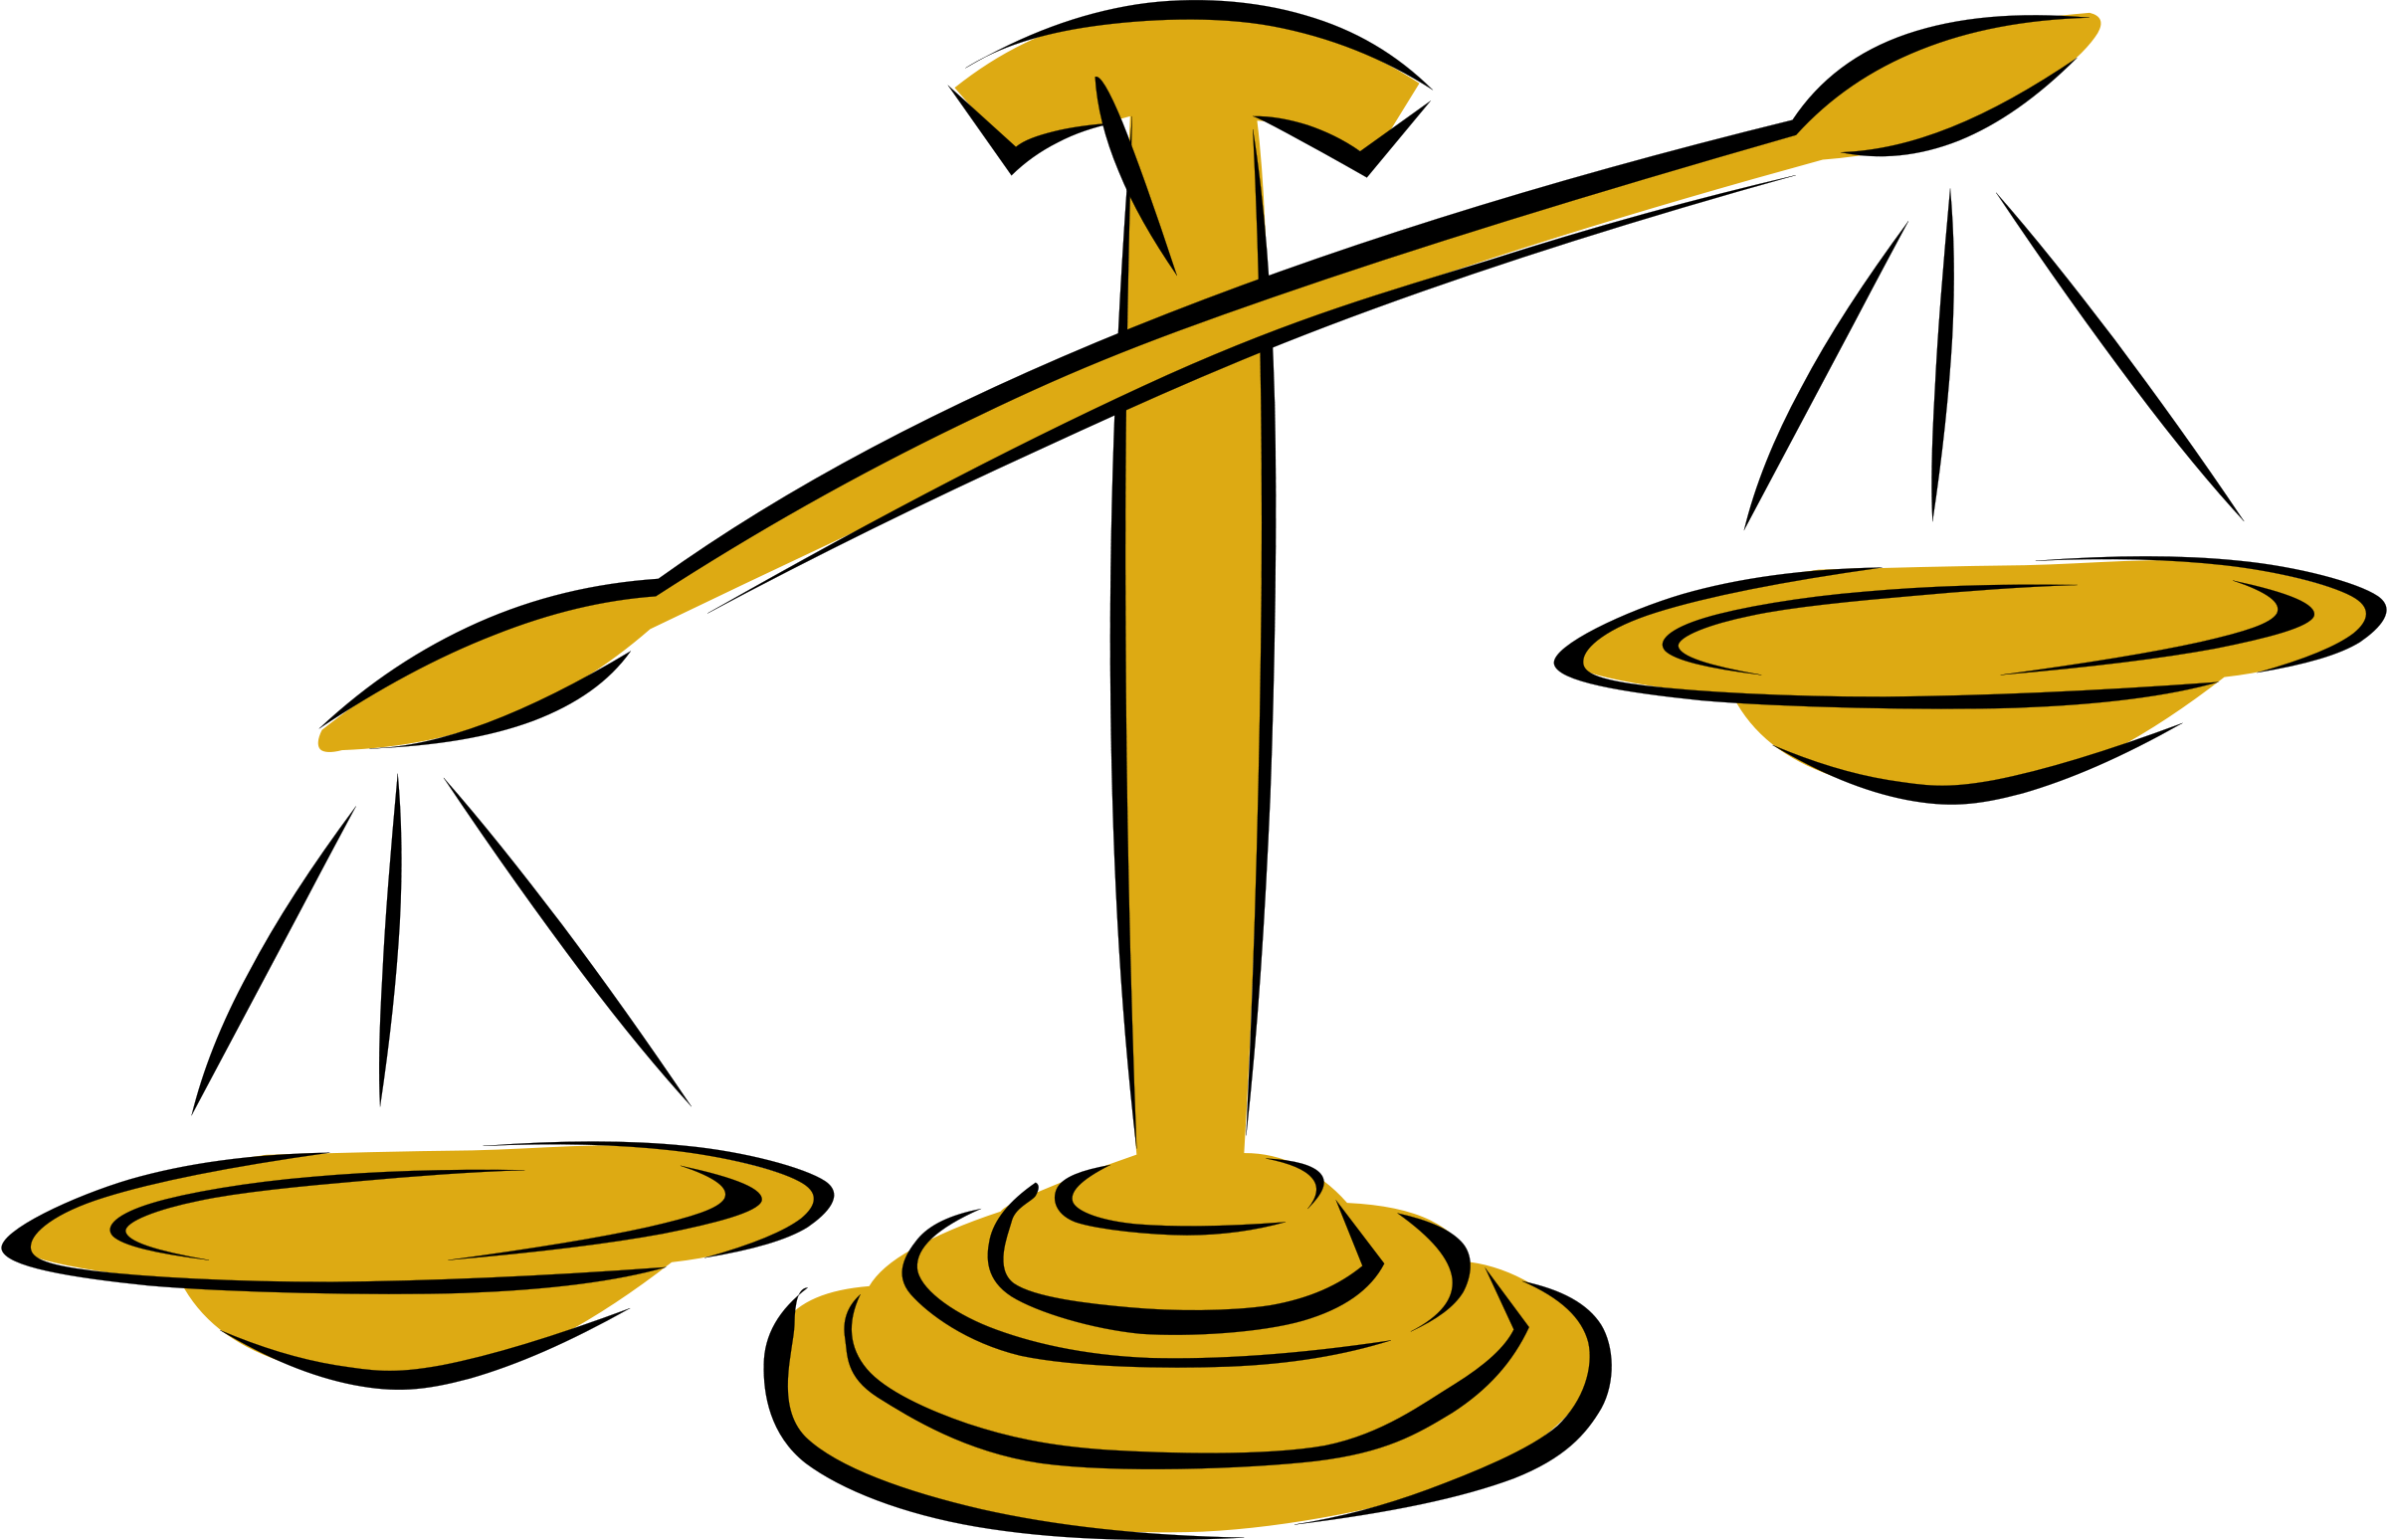 Legal clipart science mass. Weight and balance scale